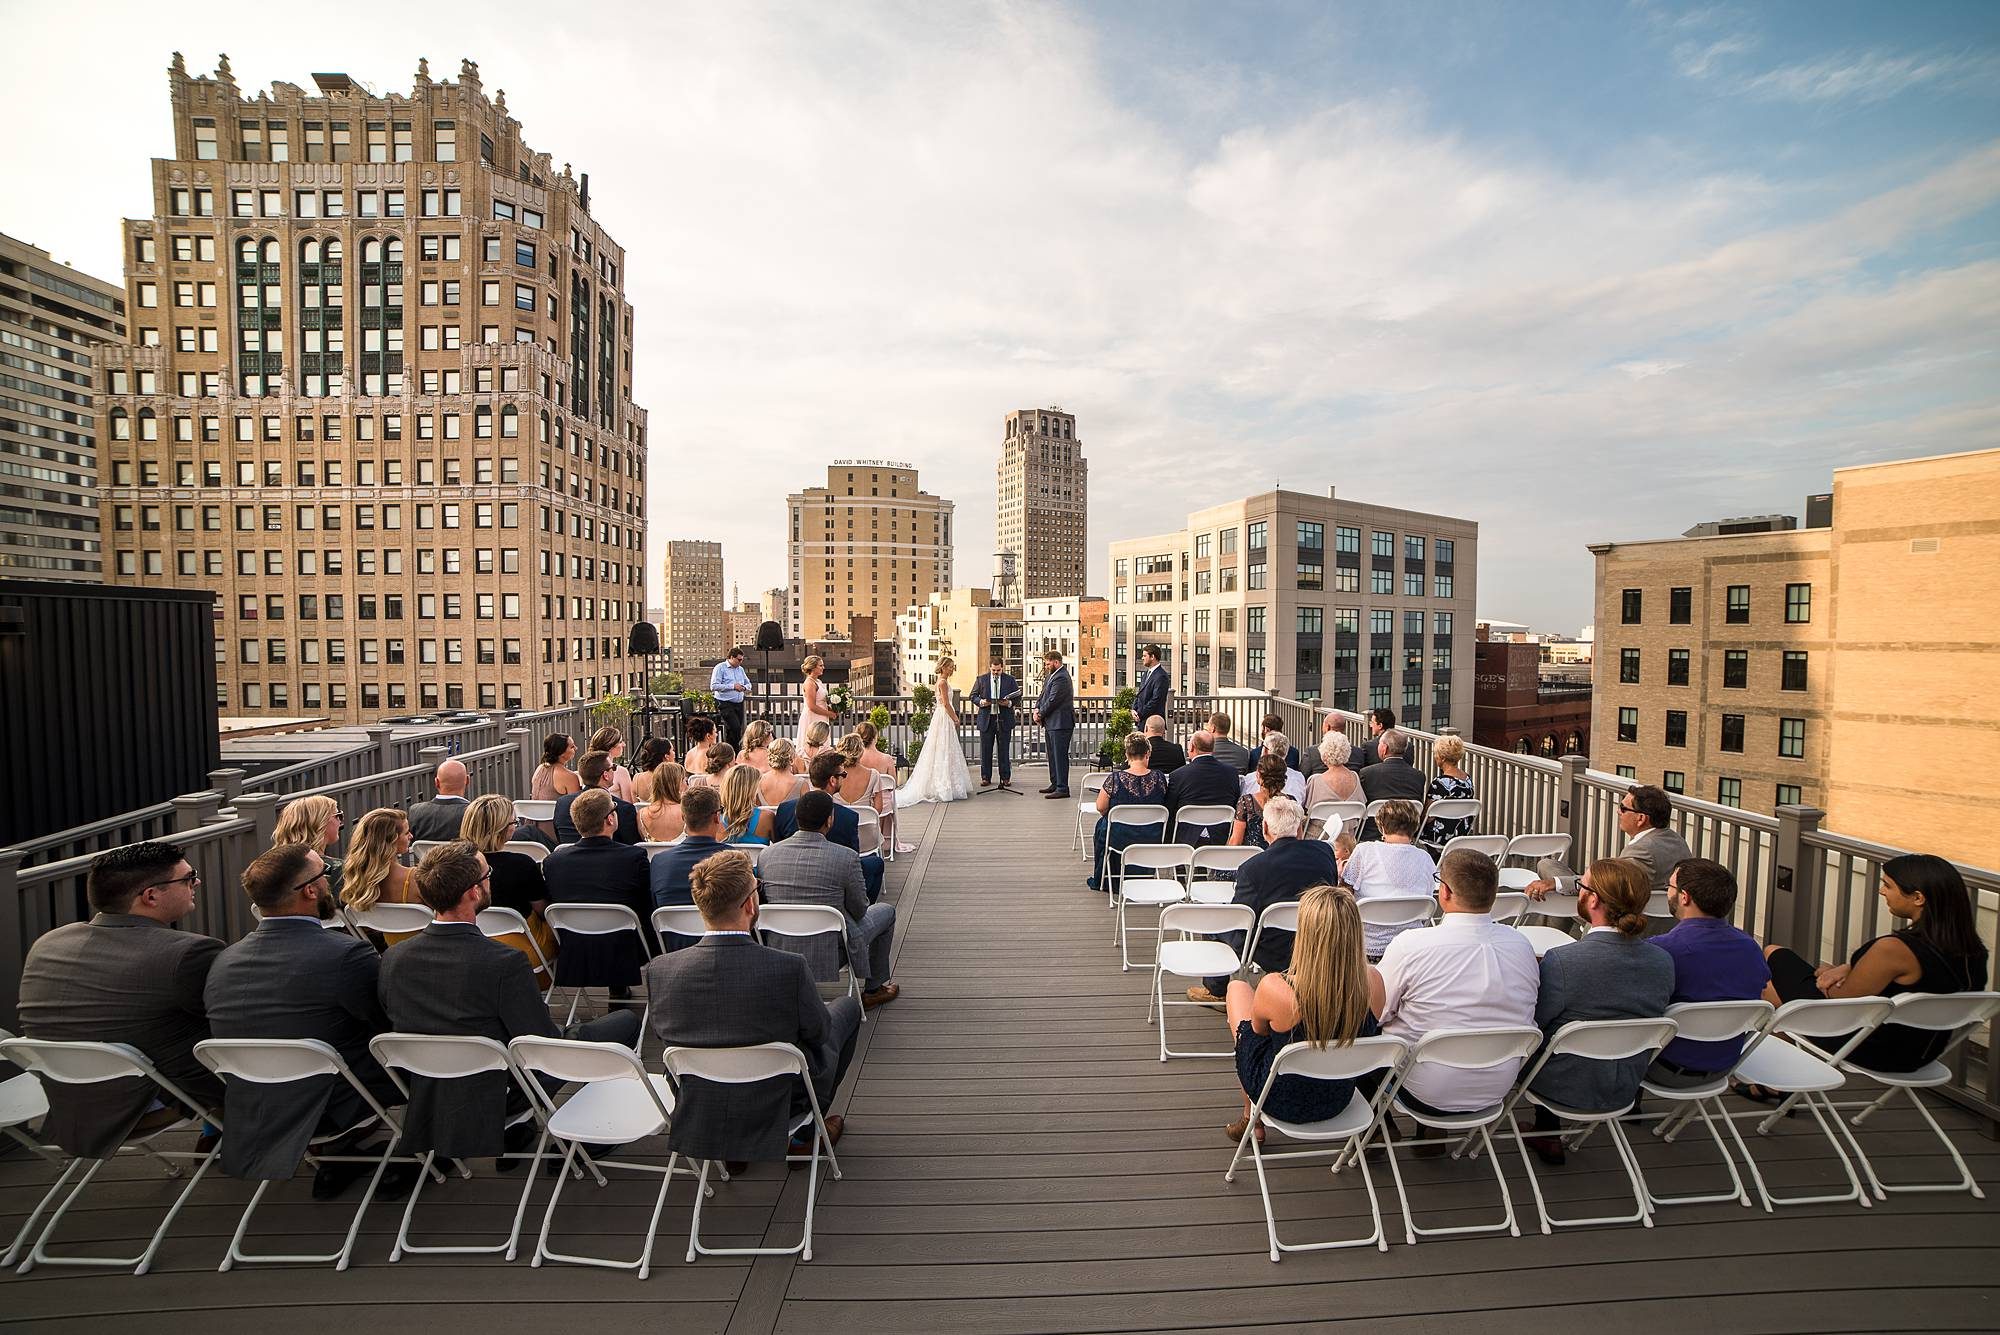 Detroit wedding photographs at the Farwell building